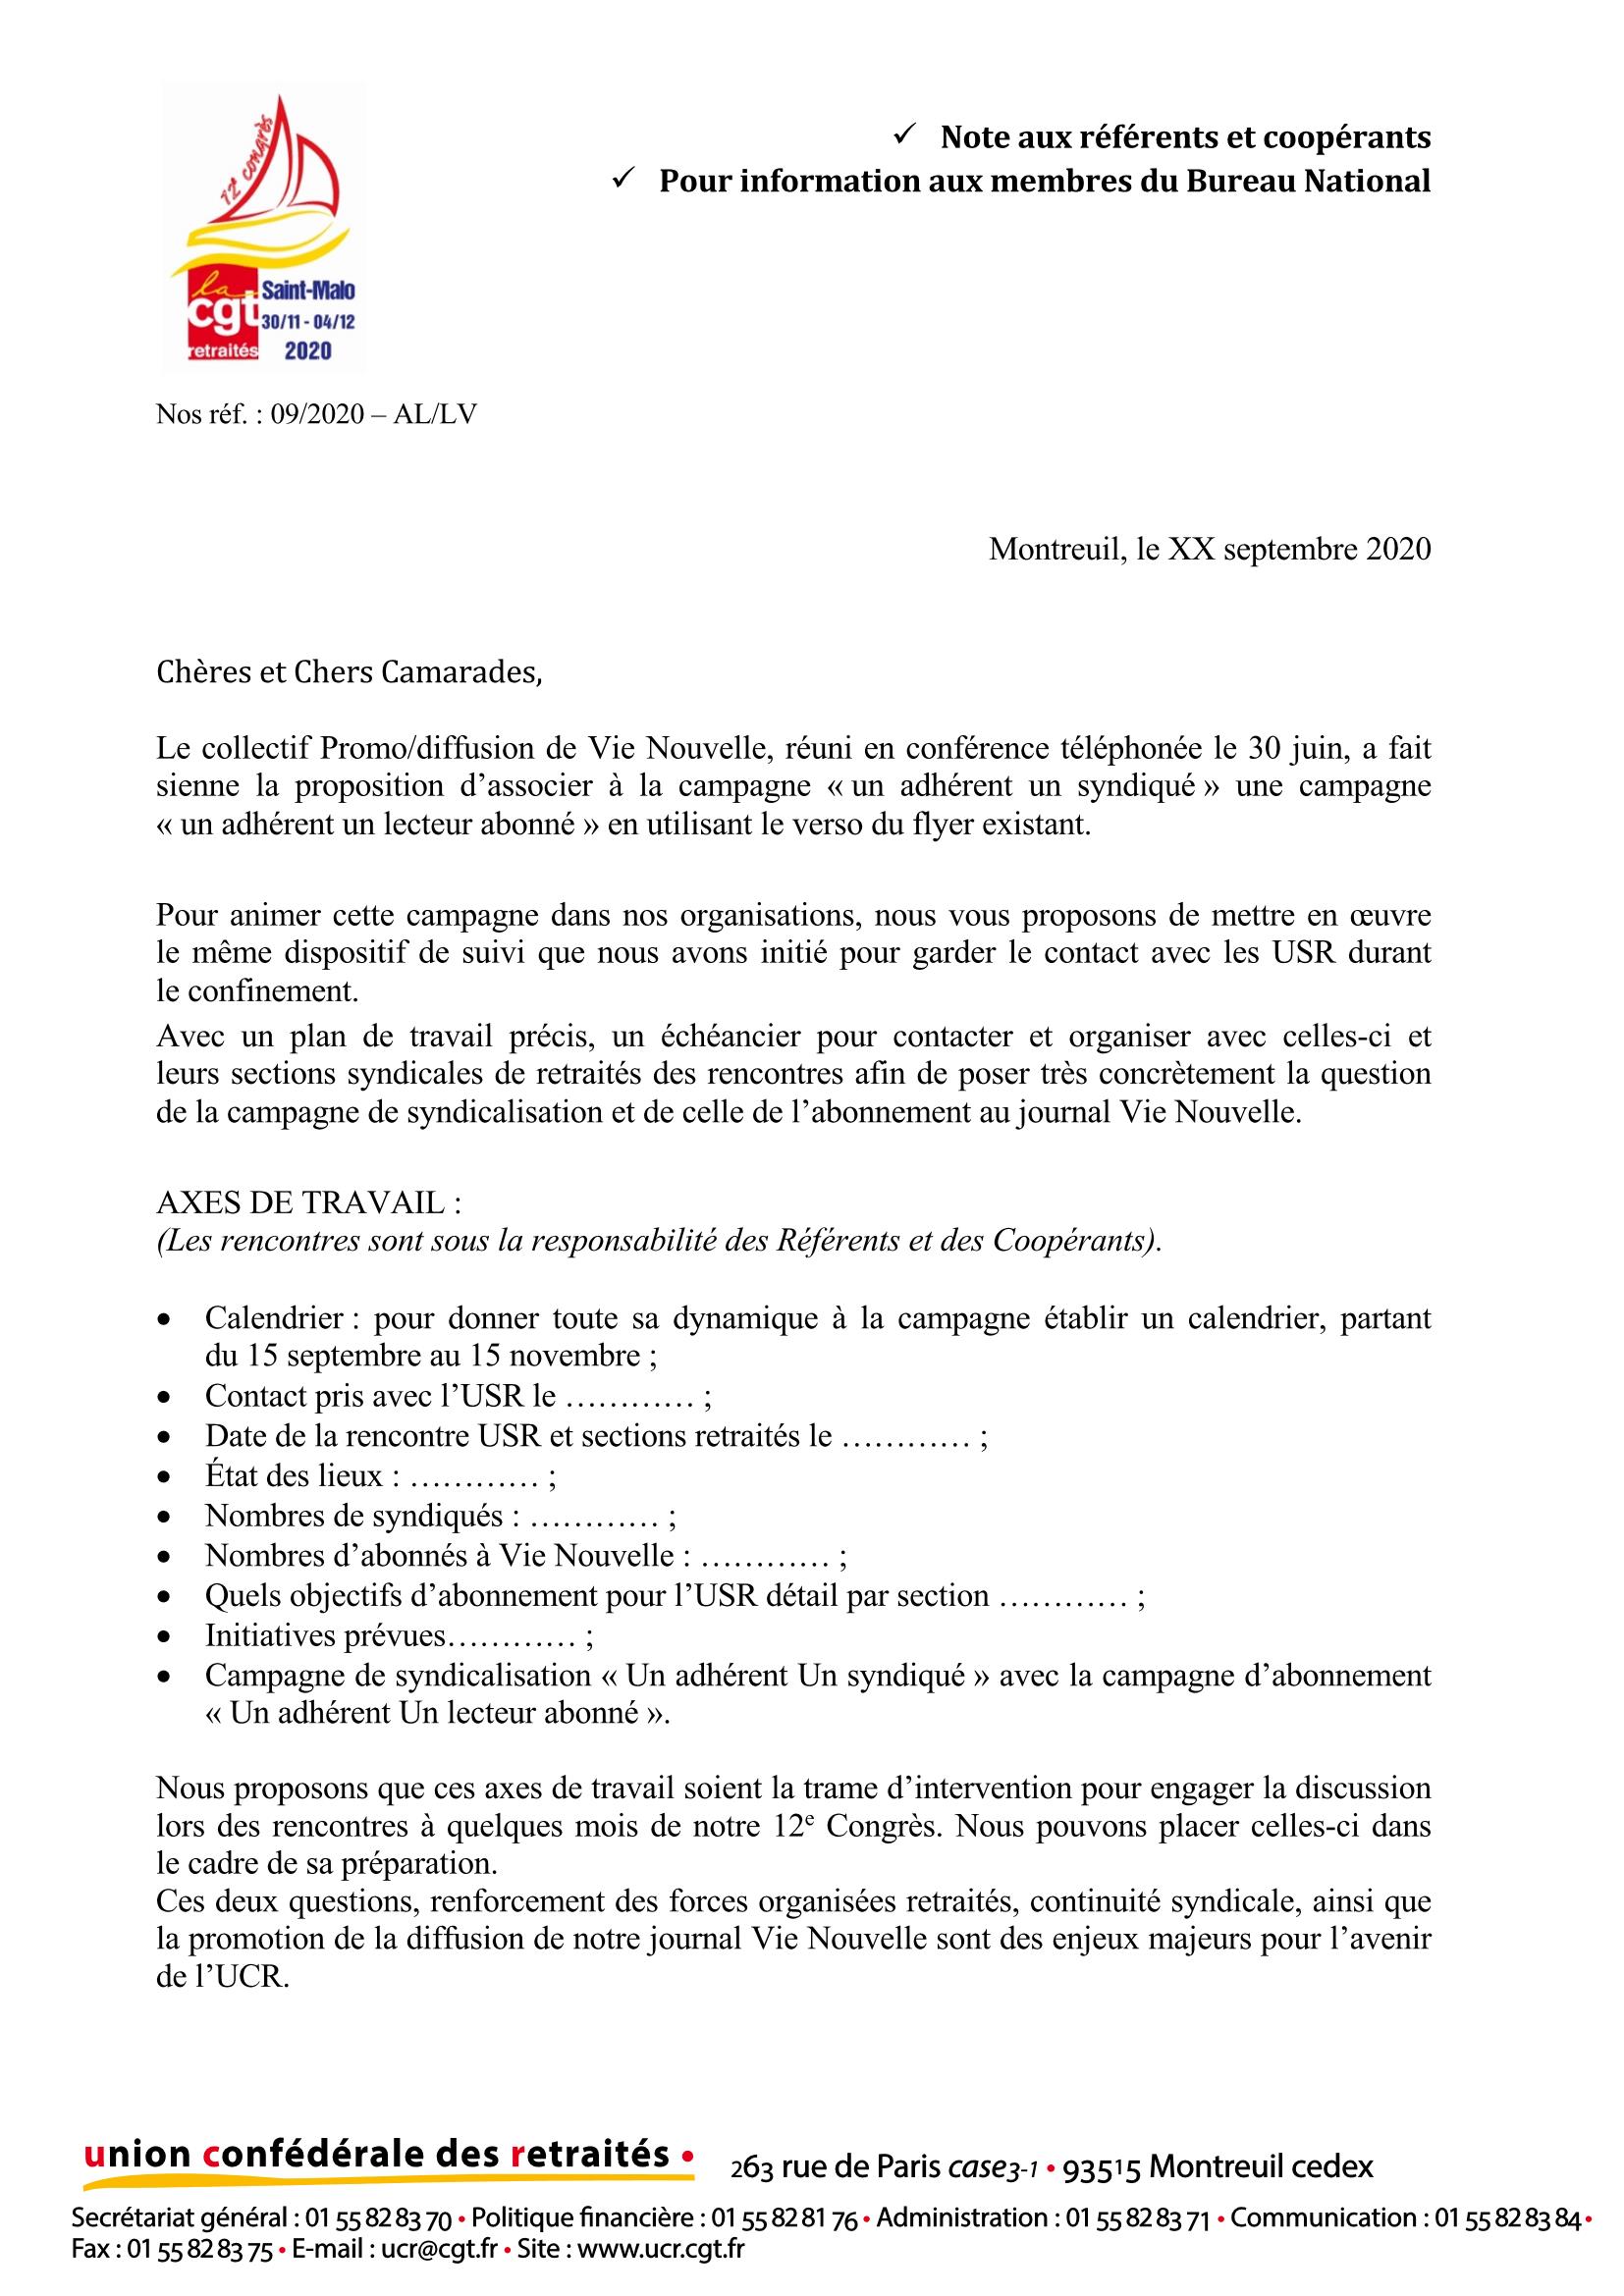 Note campagne adhesion abonnement Page 1